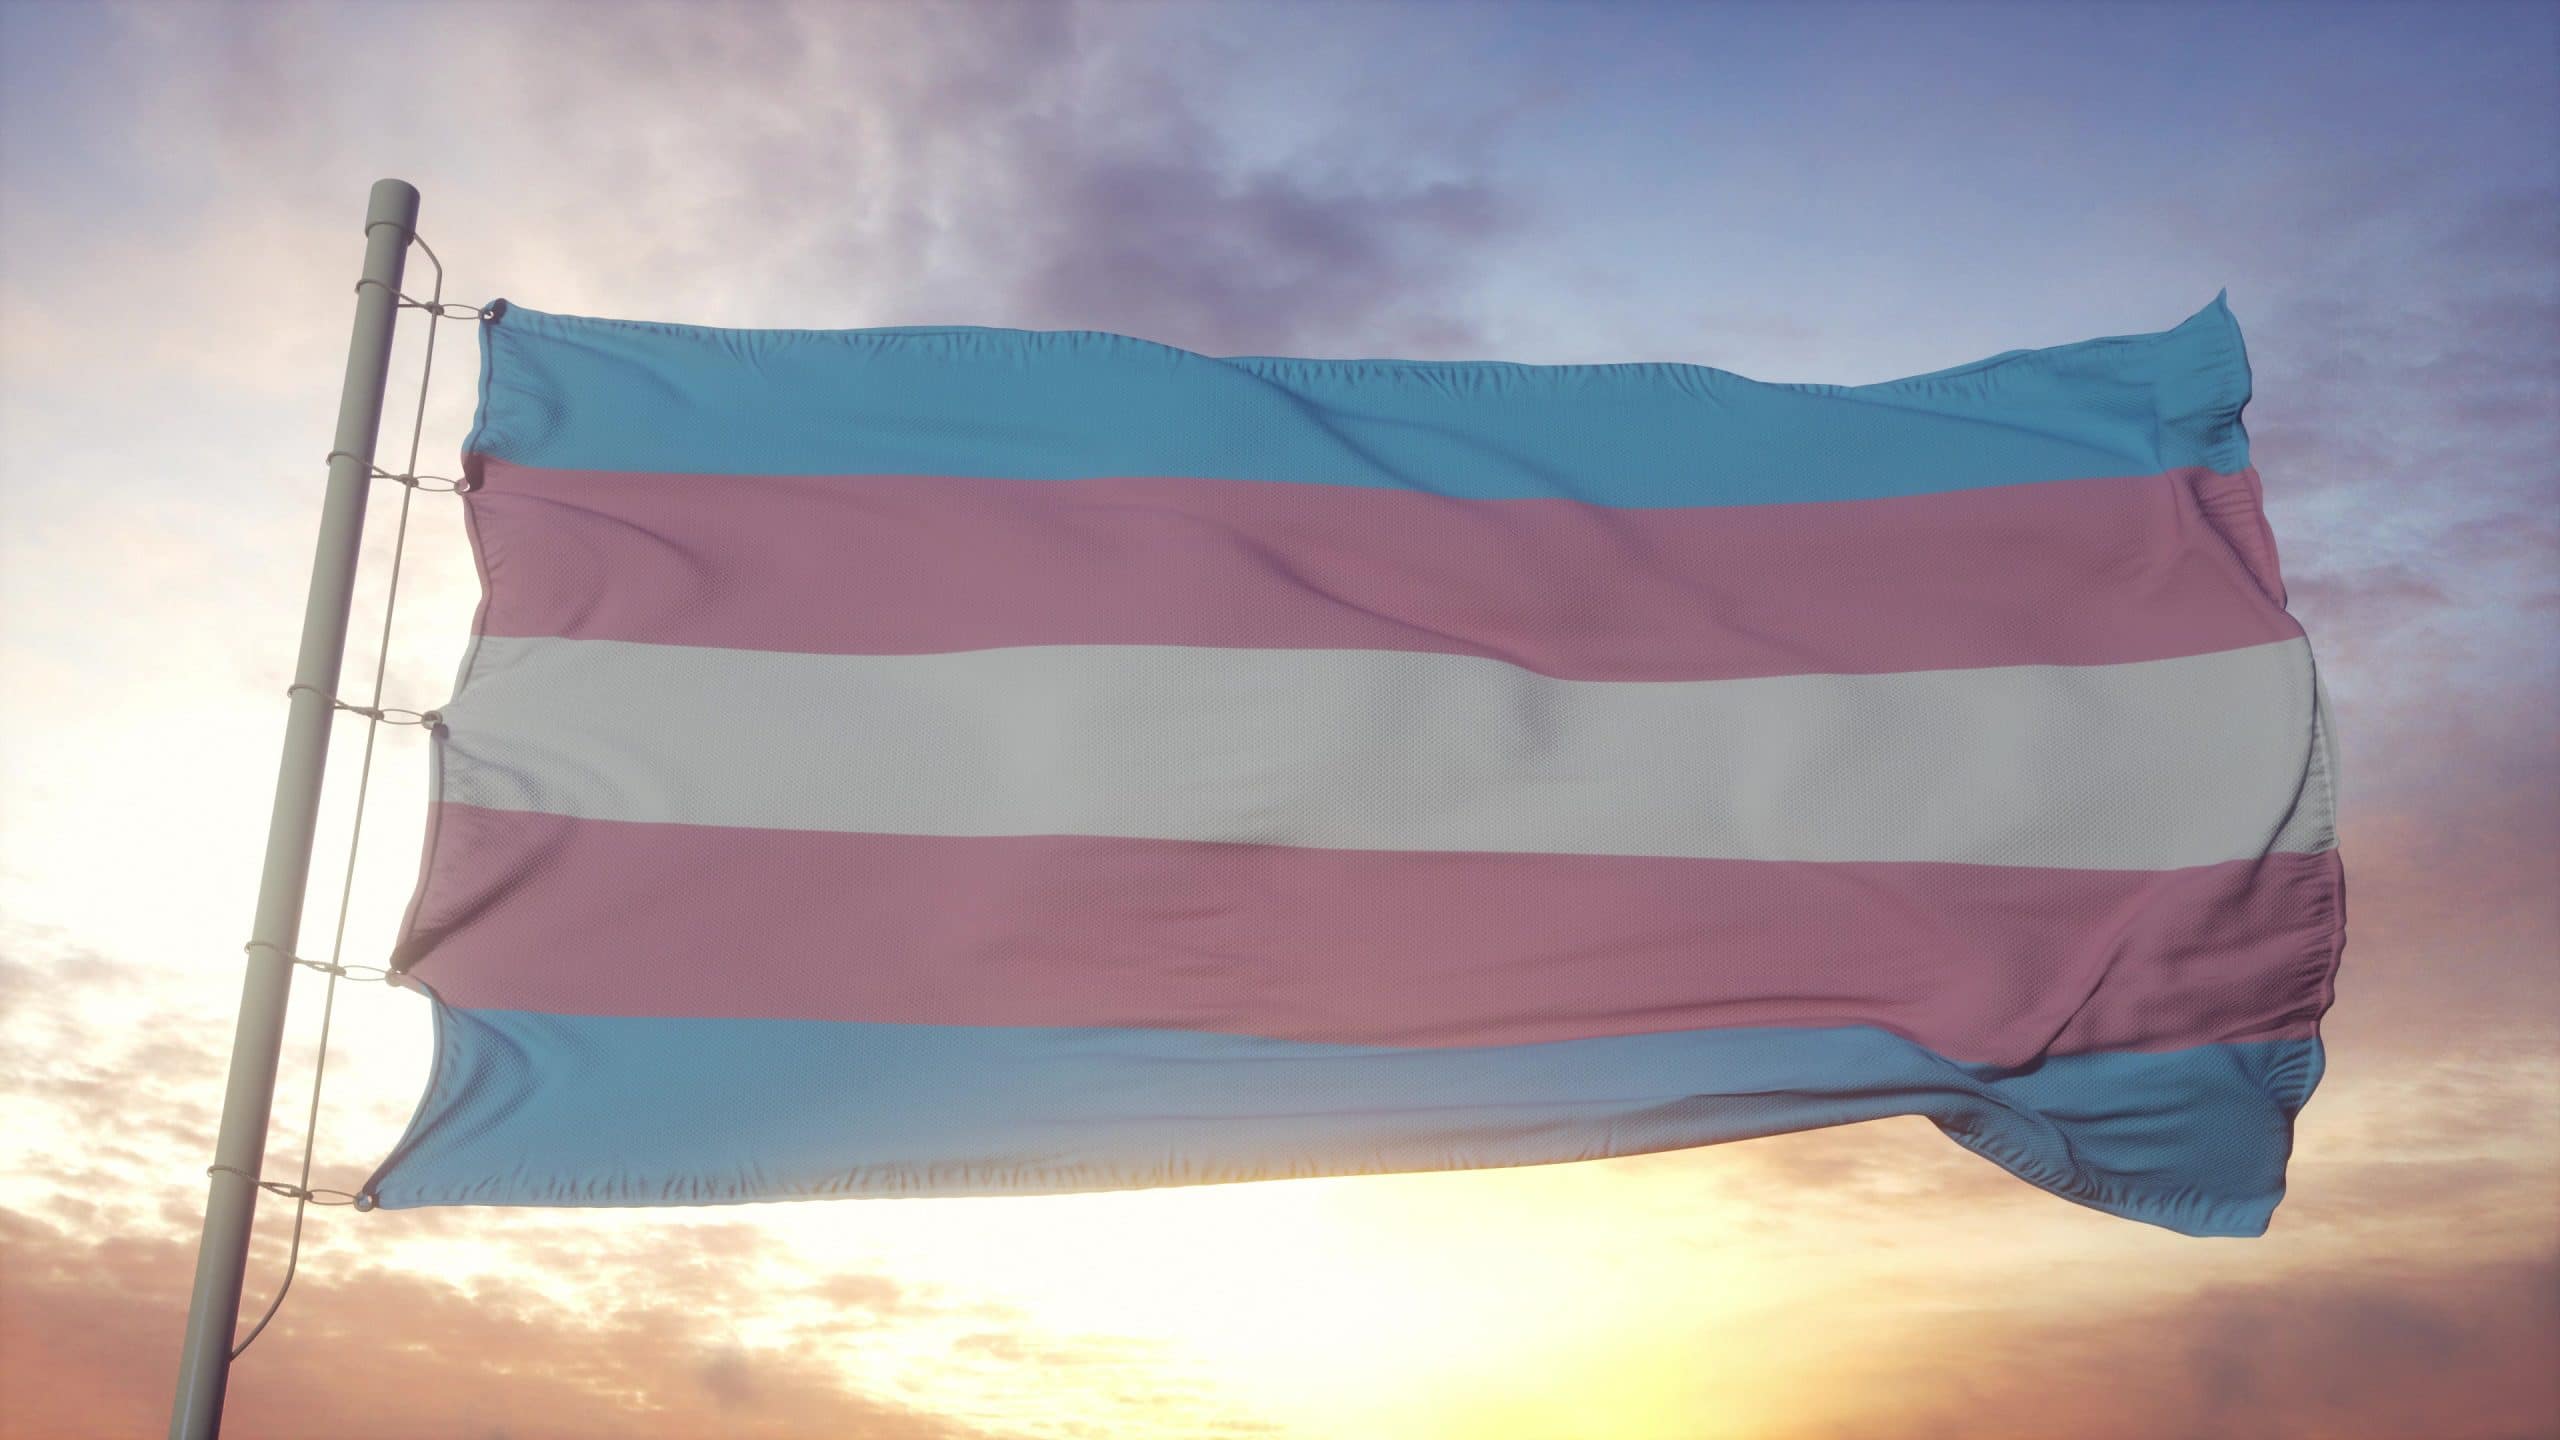 Transgender pride flag waving in the wind, sky and sun background.